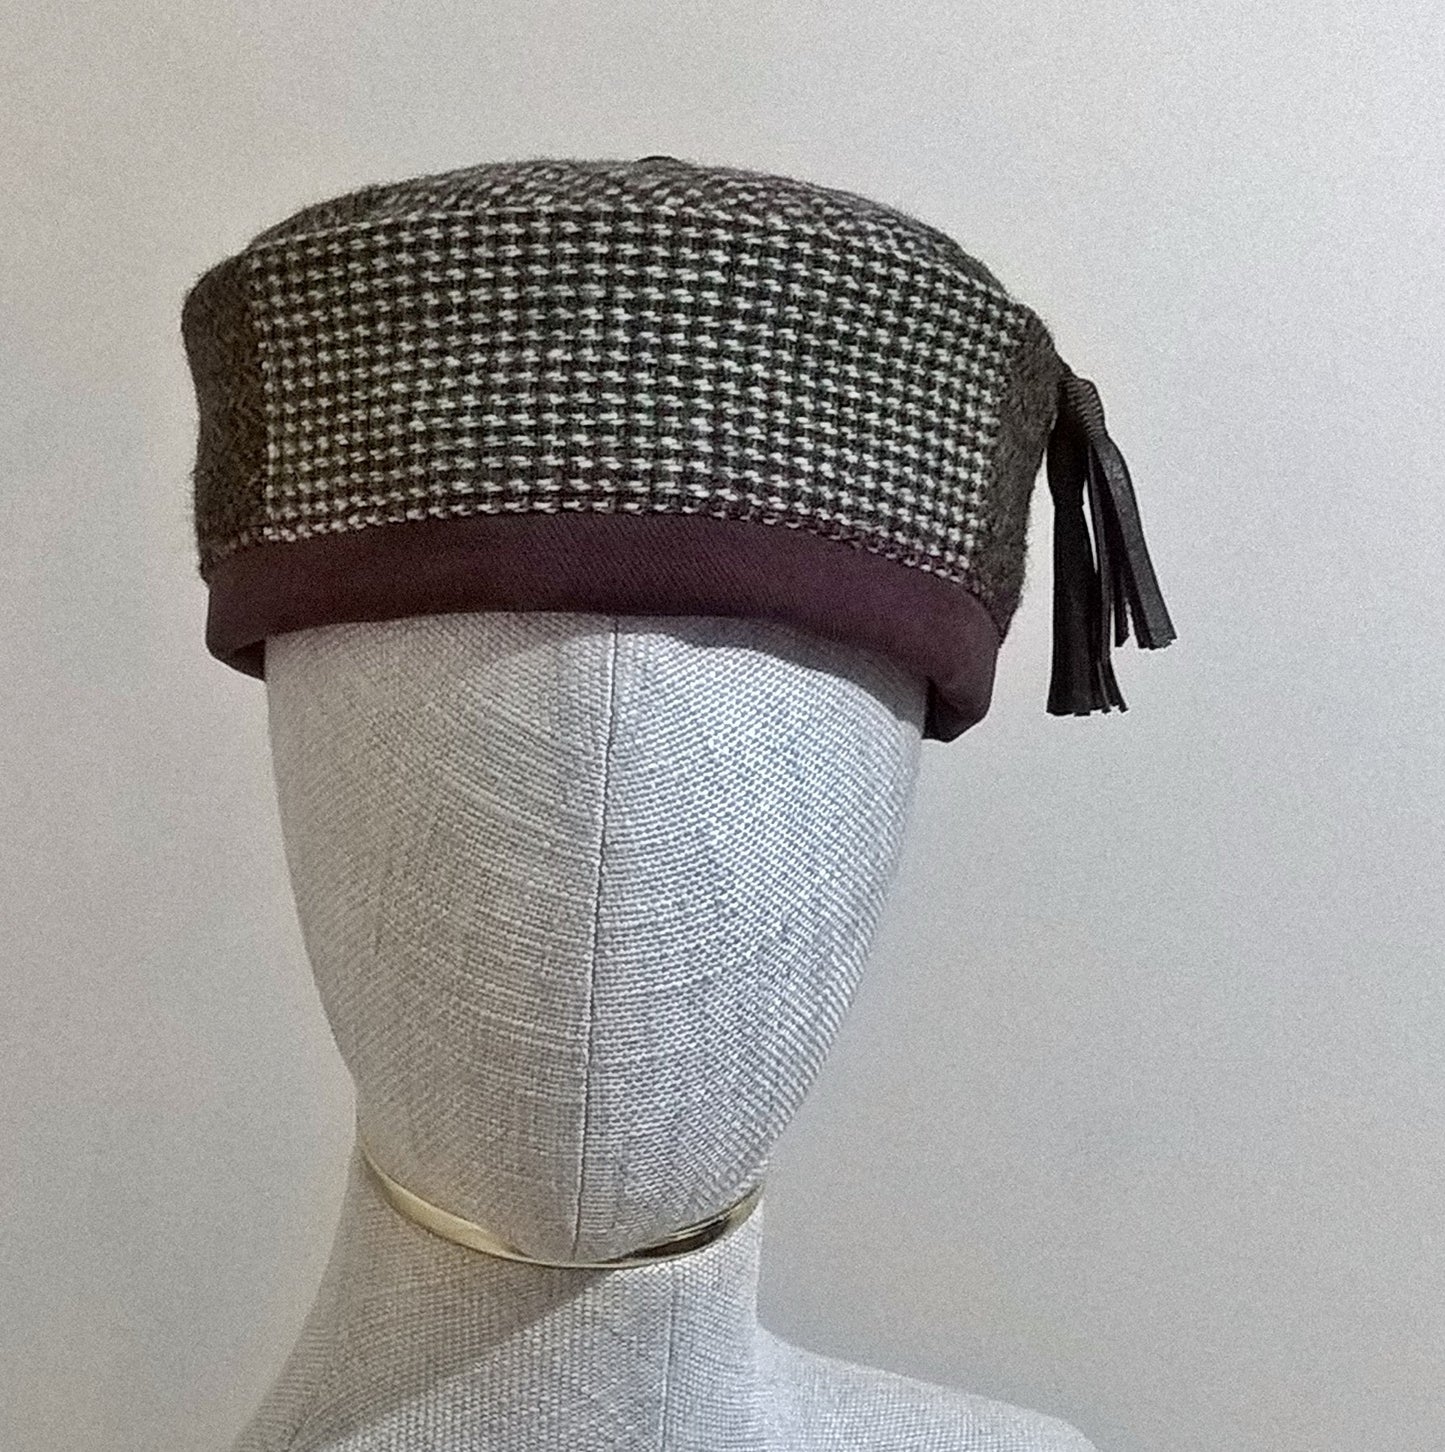 Patchwork Harris Tweed smoking cap with leather tassel in browns, maroon, and cream.